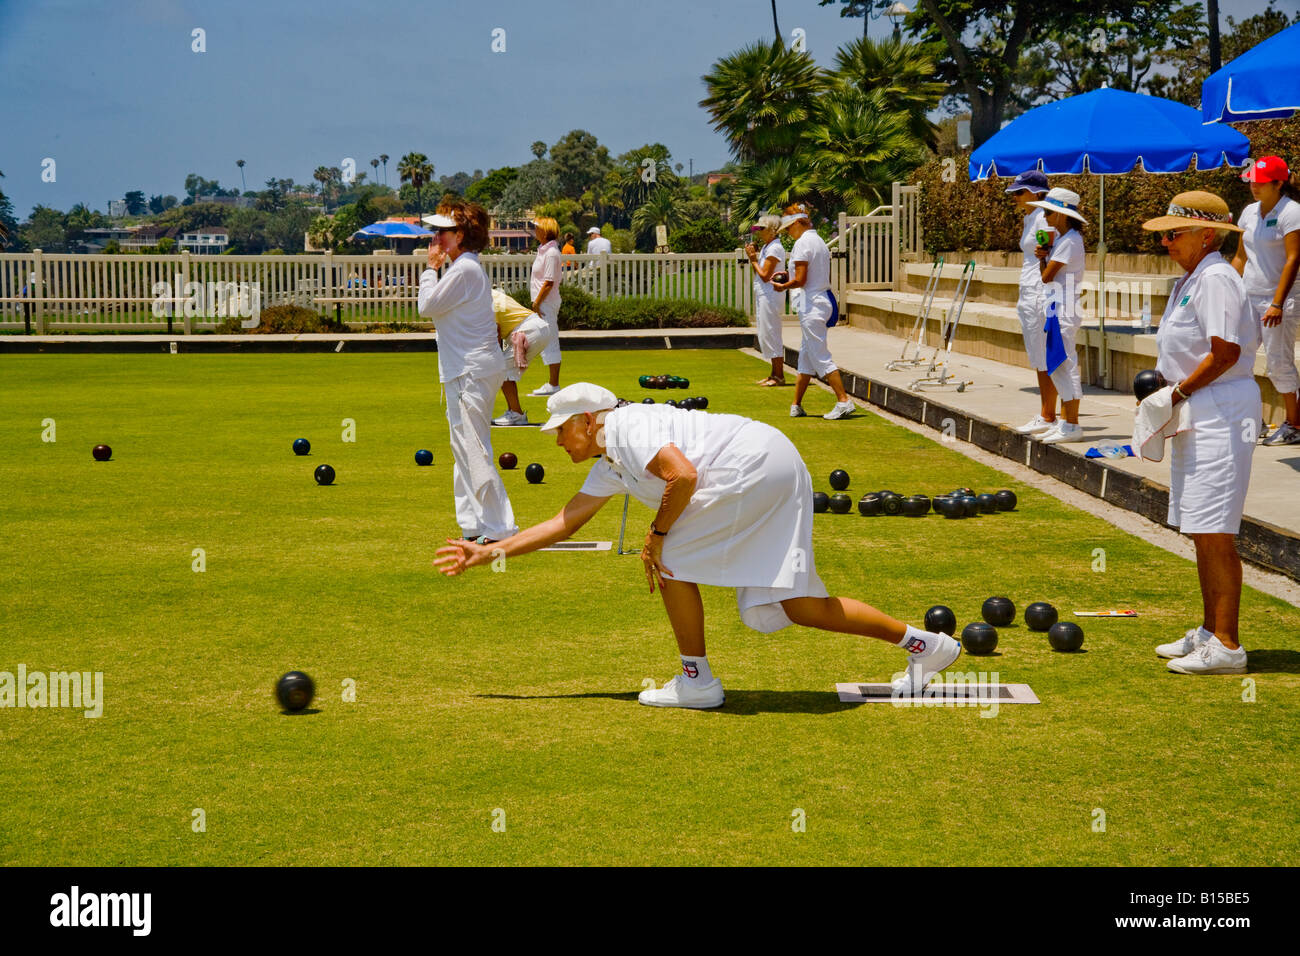 Women players roll balls at a lawn bowling competition on a bowling green in Laguna Beach CA Stock Photo